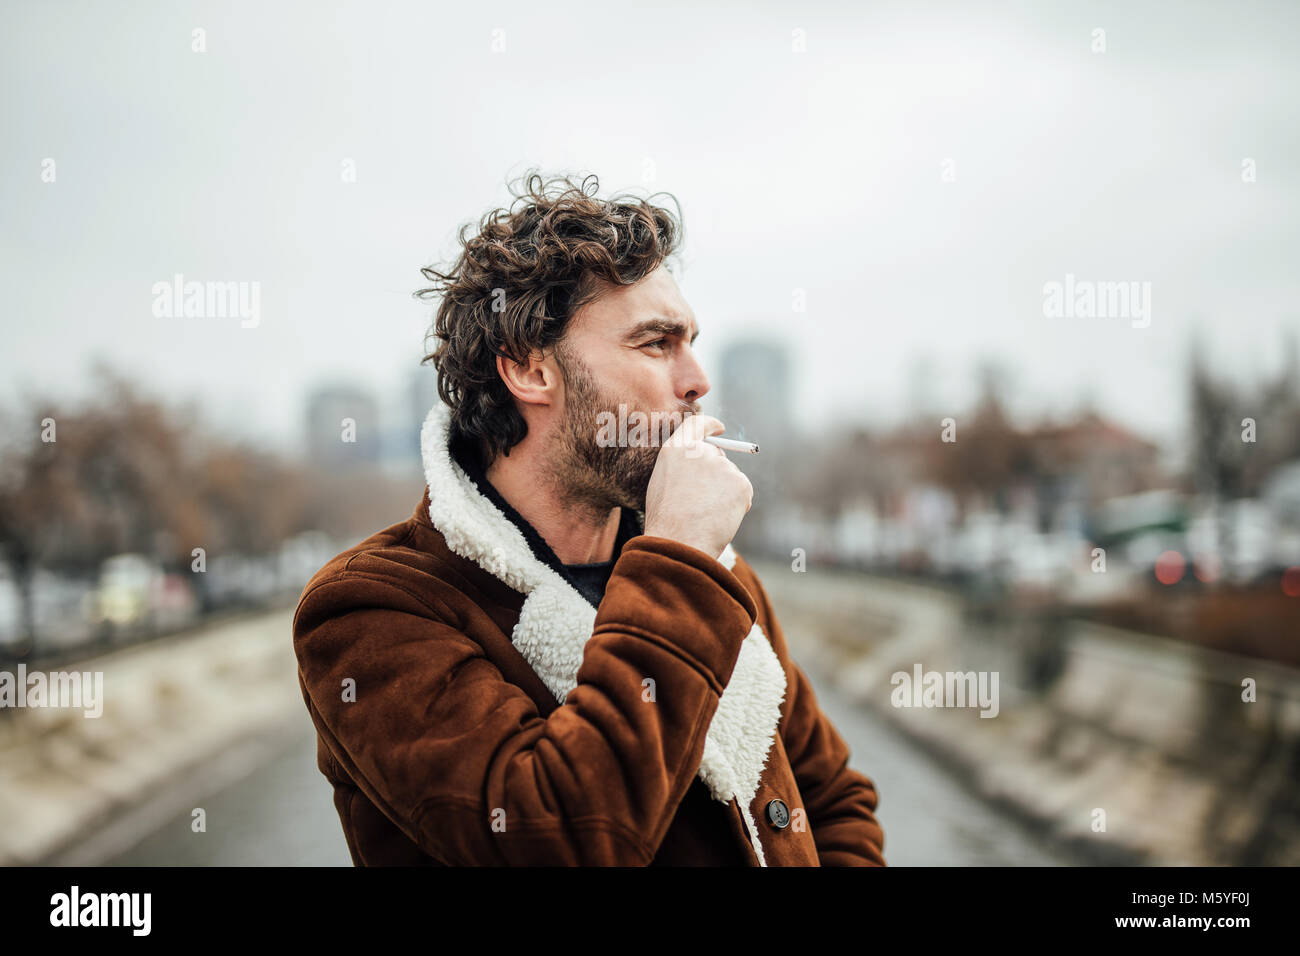 cool handsome man smoking cigarette outside in a aviator coat with masculine attitude waiting for some Stock Photo